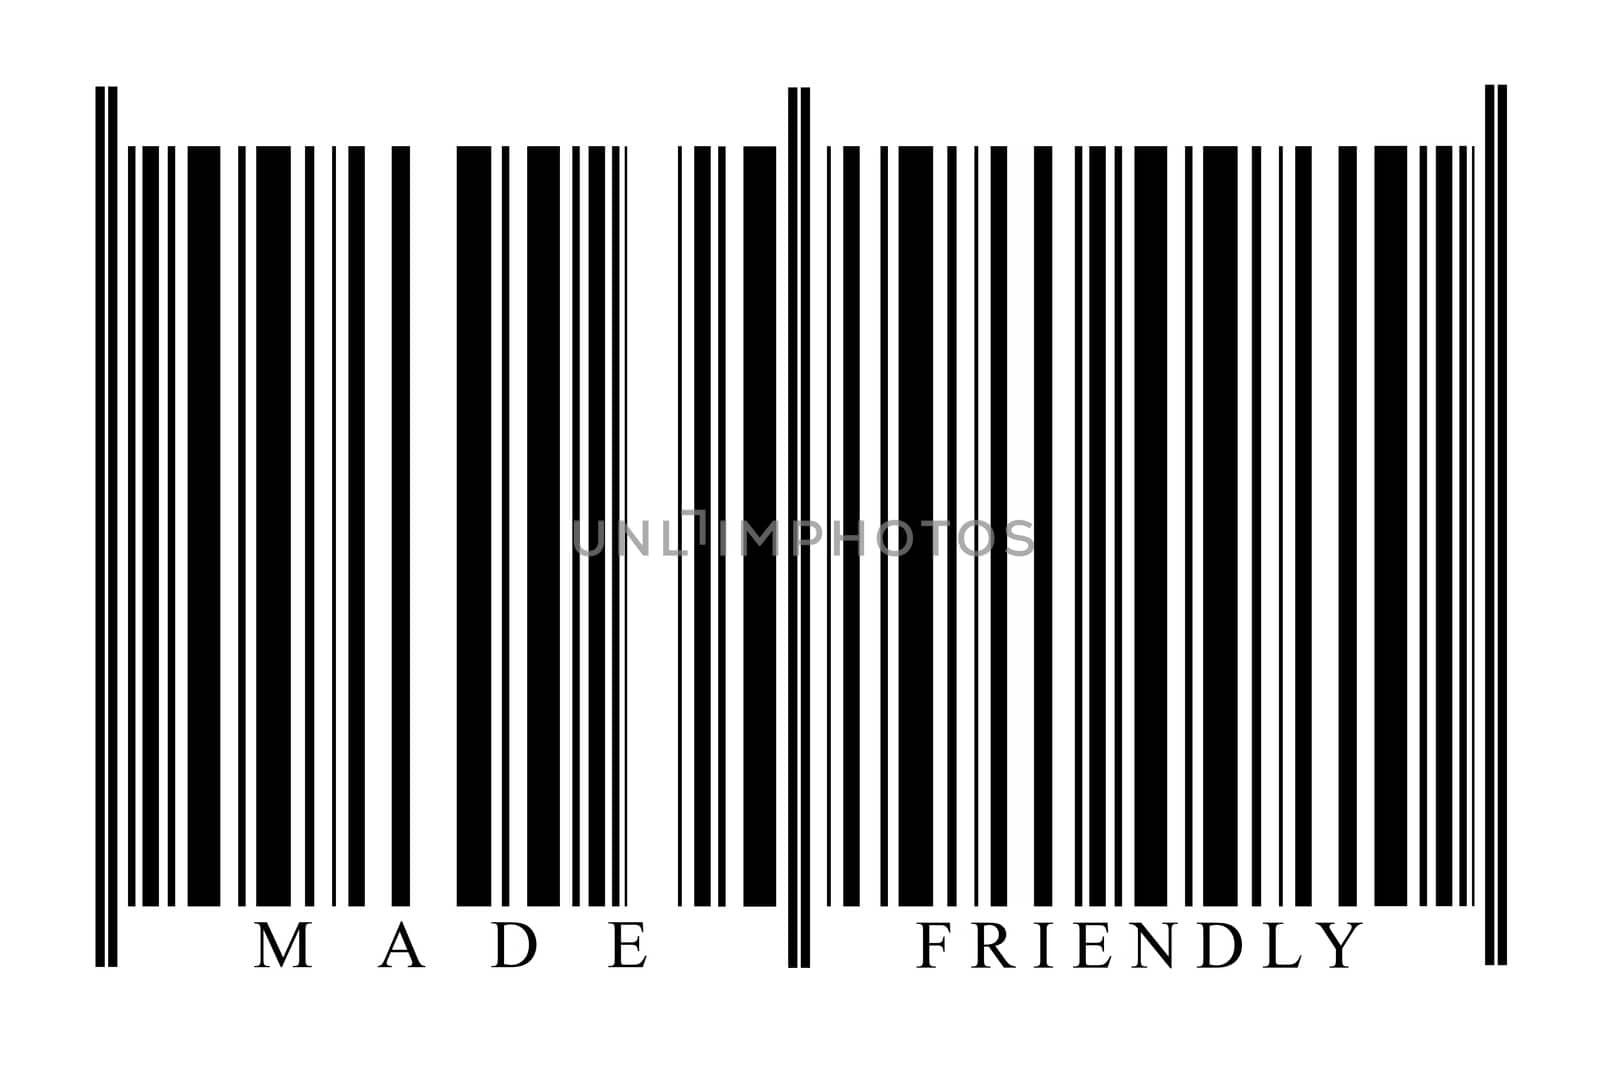 Friendly Barcode on white background